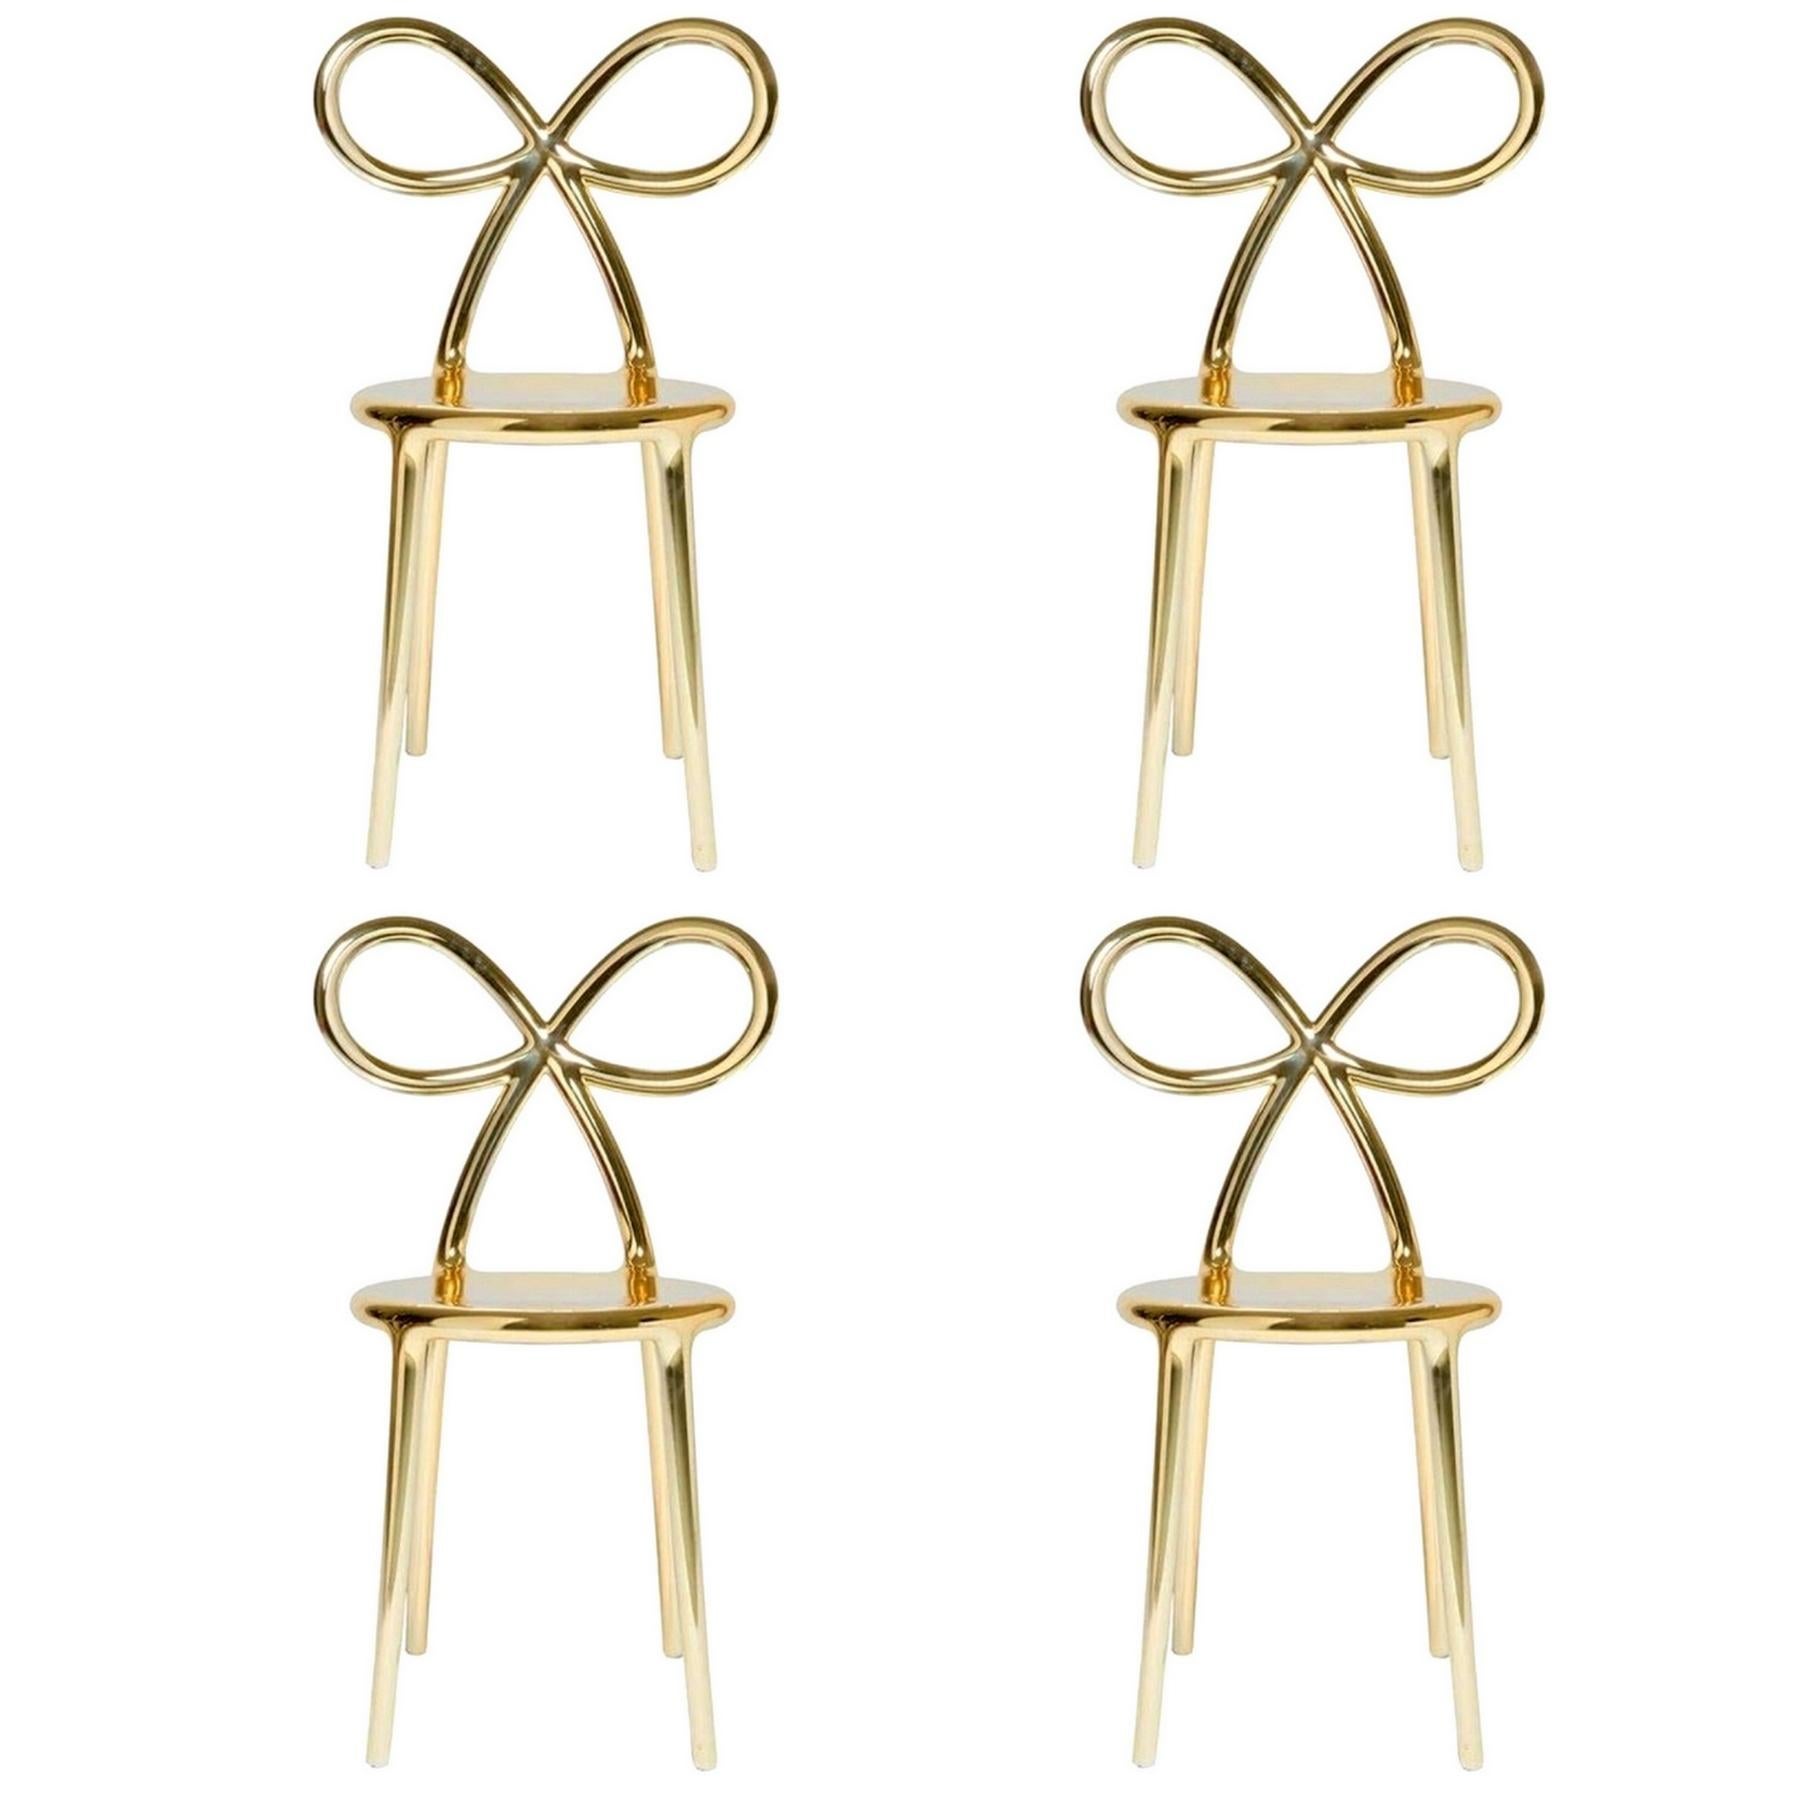 Set of 4 Gold Metallic Ribbon Chairs by Nika Zupanc, Made in Italy In New Condition For Sale In Beverly Hills, CA